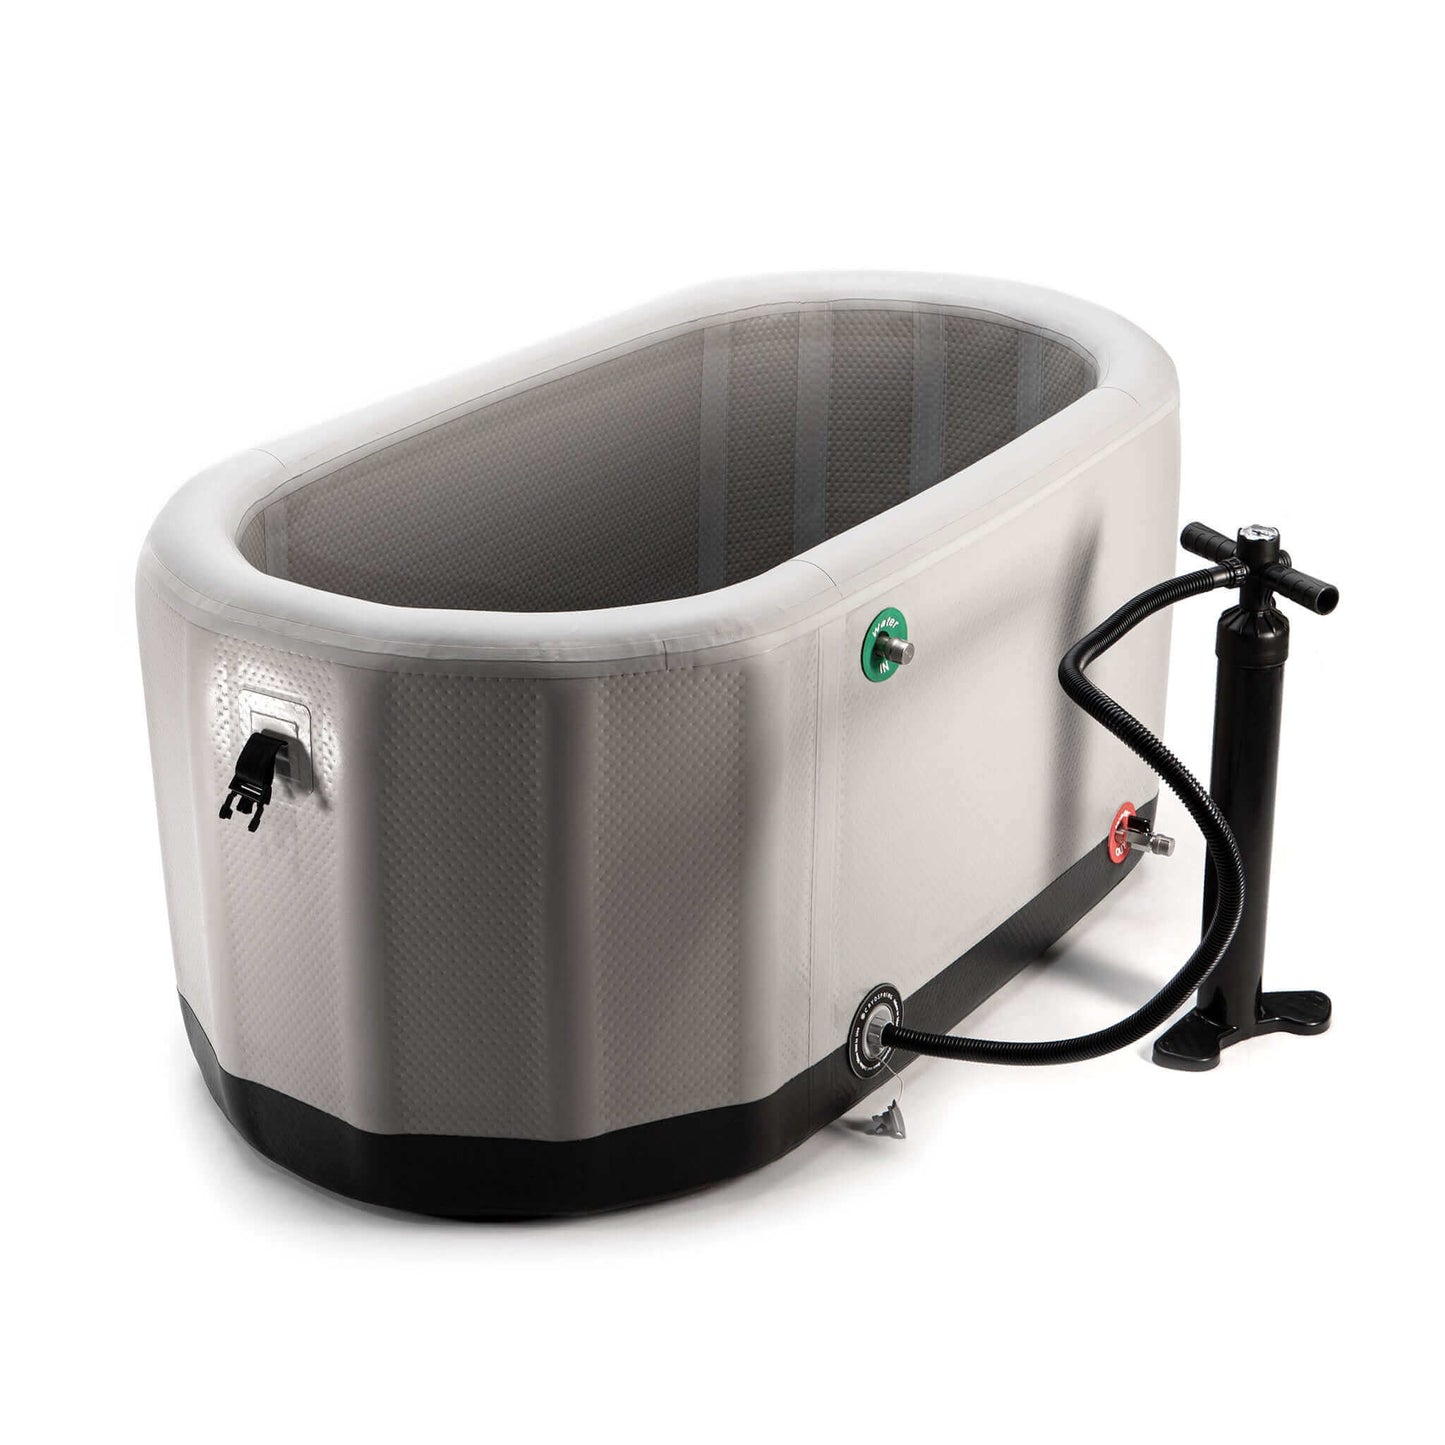 Black Cryospring Cold & Hot Plunges System by Cryospring sold by Pilates Matters® by BSP LLC